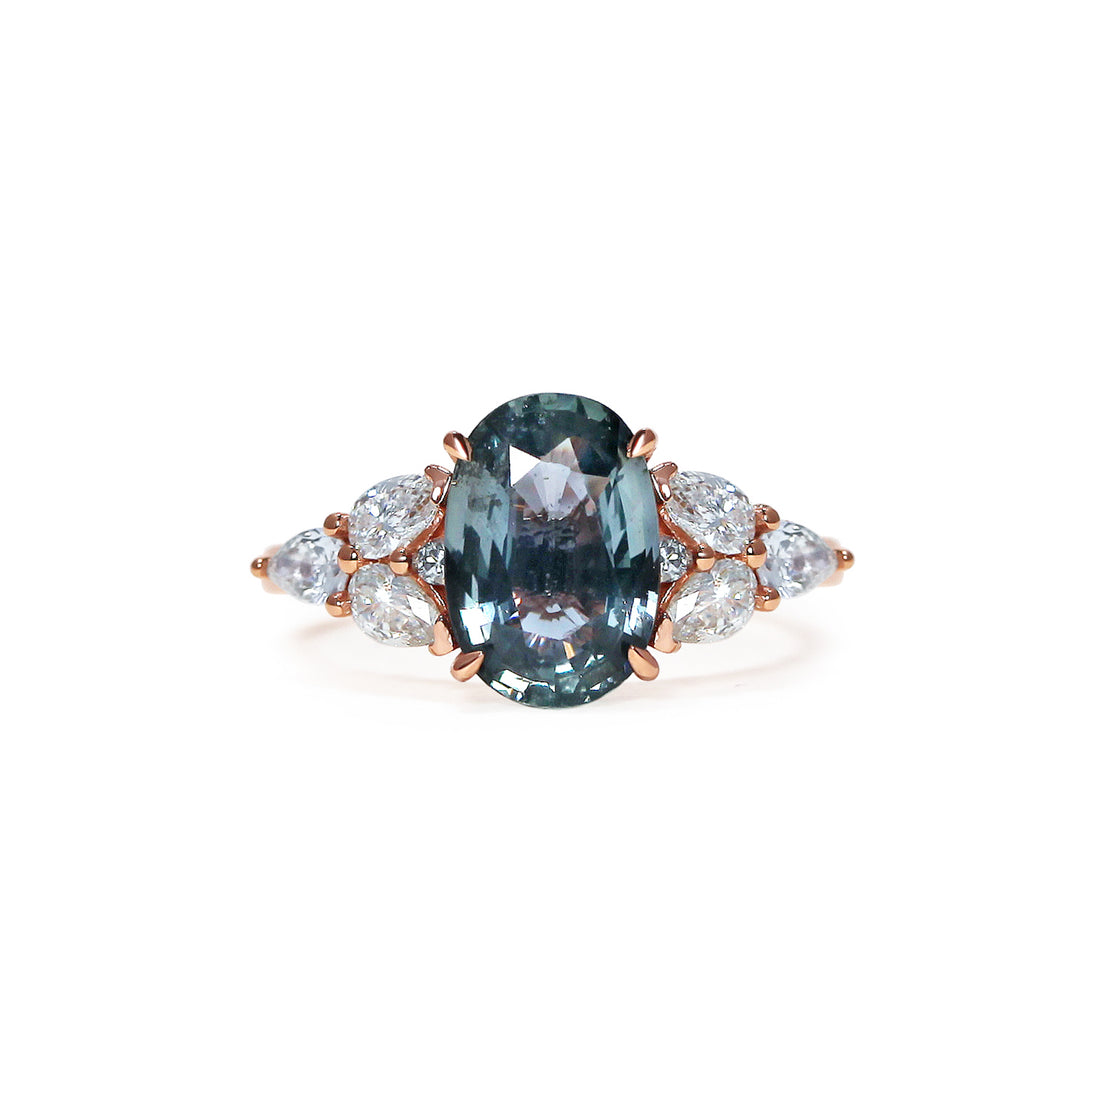  Denim Blue Sapphire Ring by Michelle Oh | The Cut London